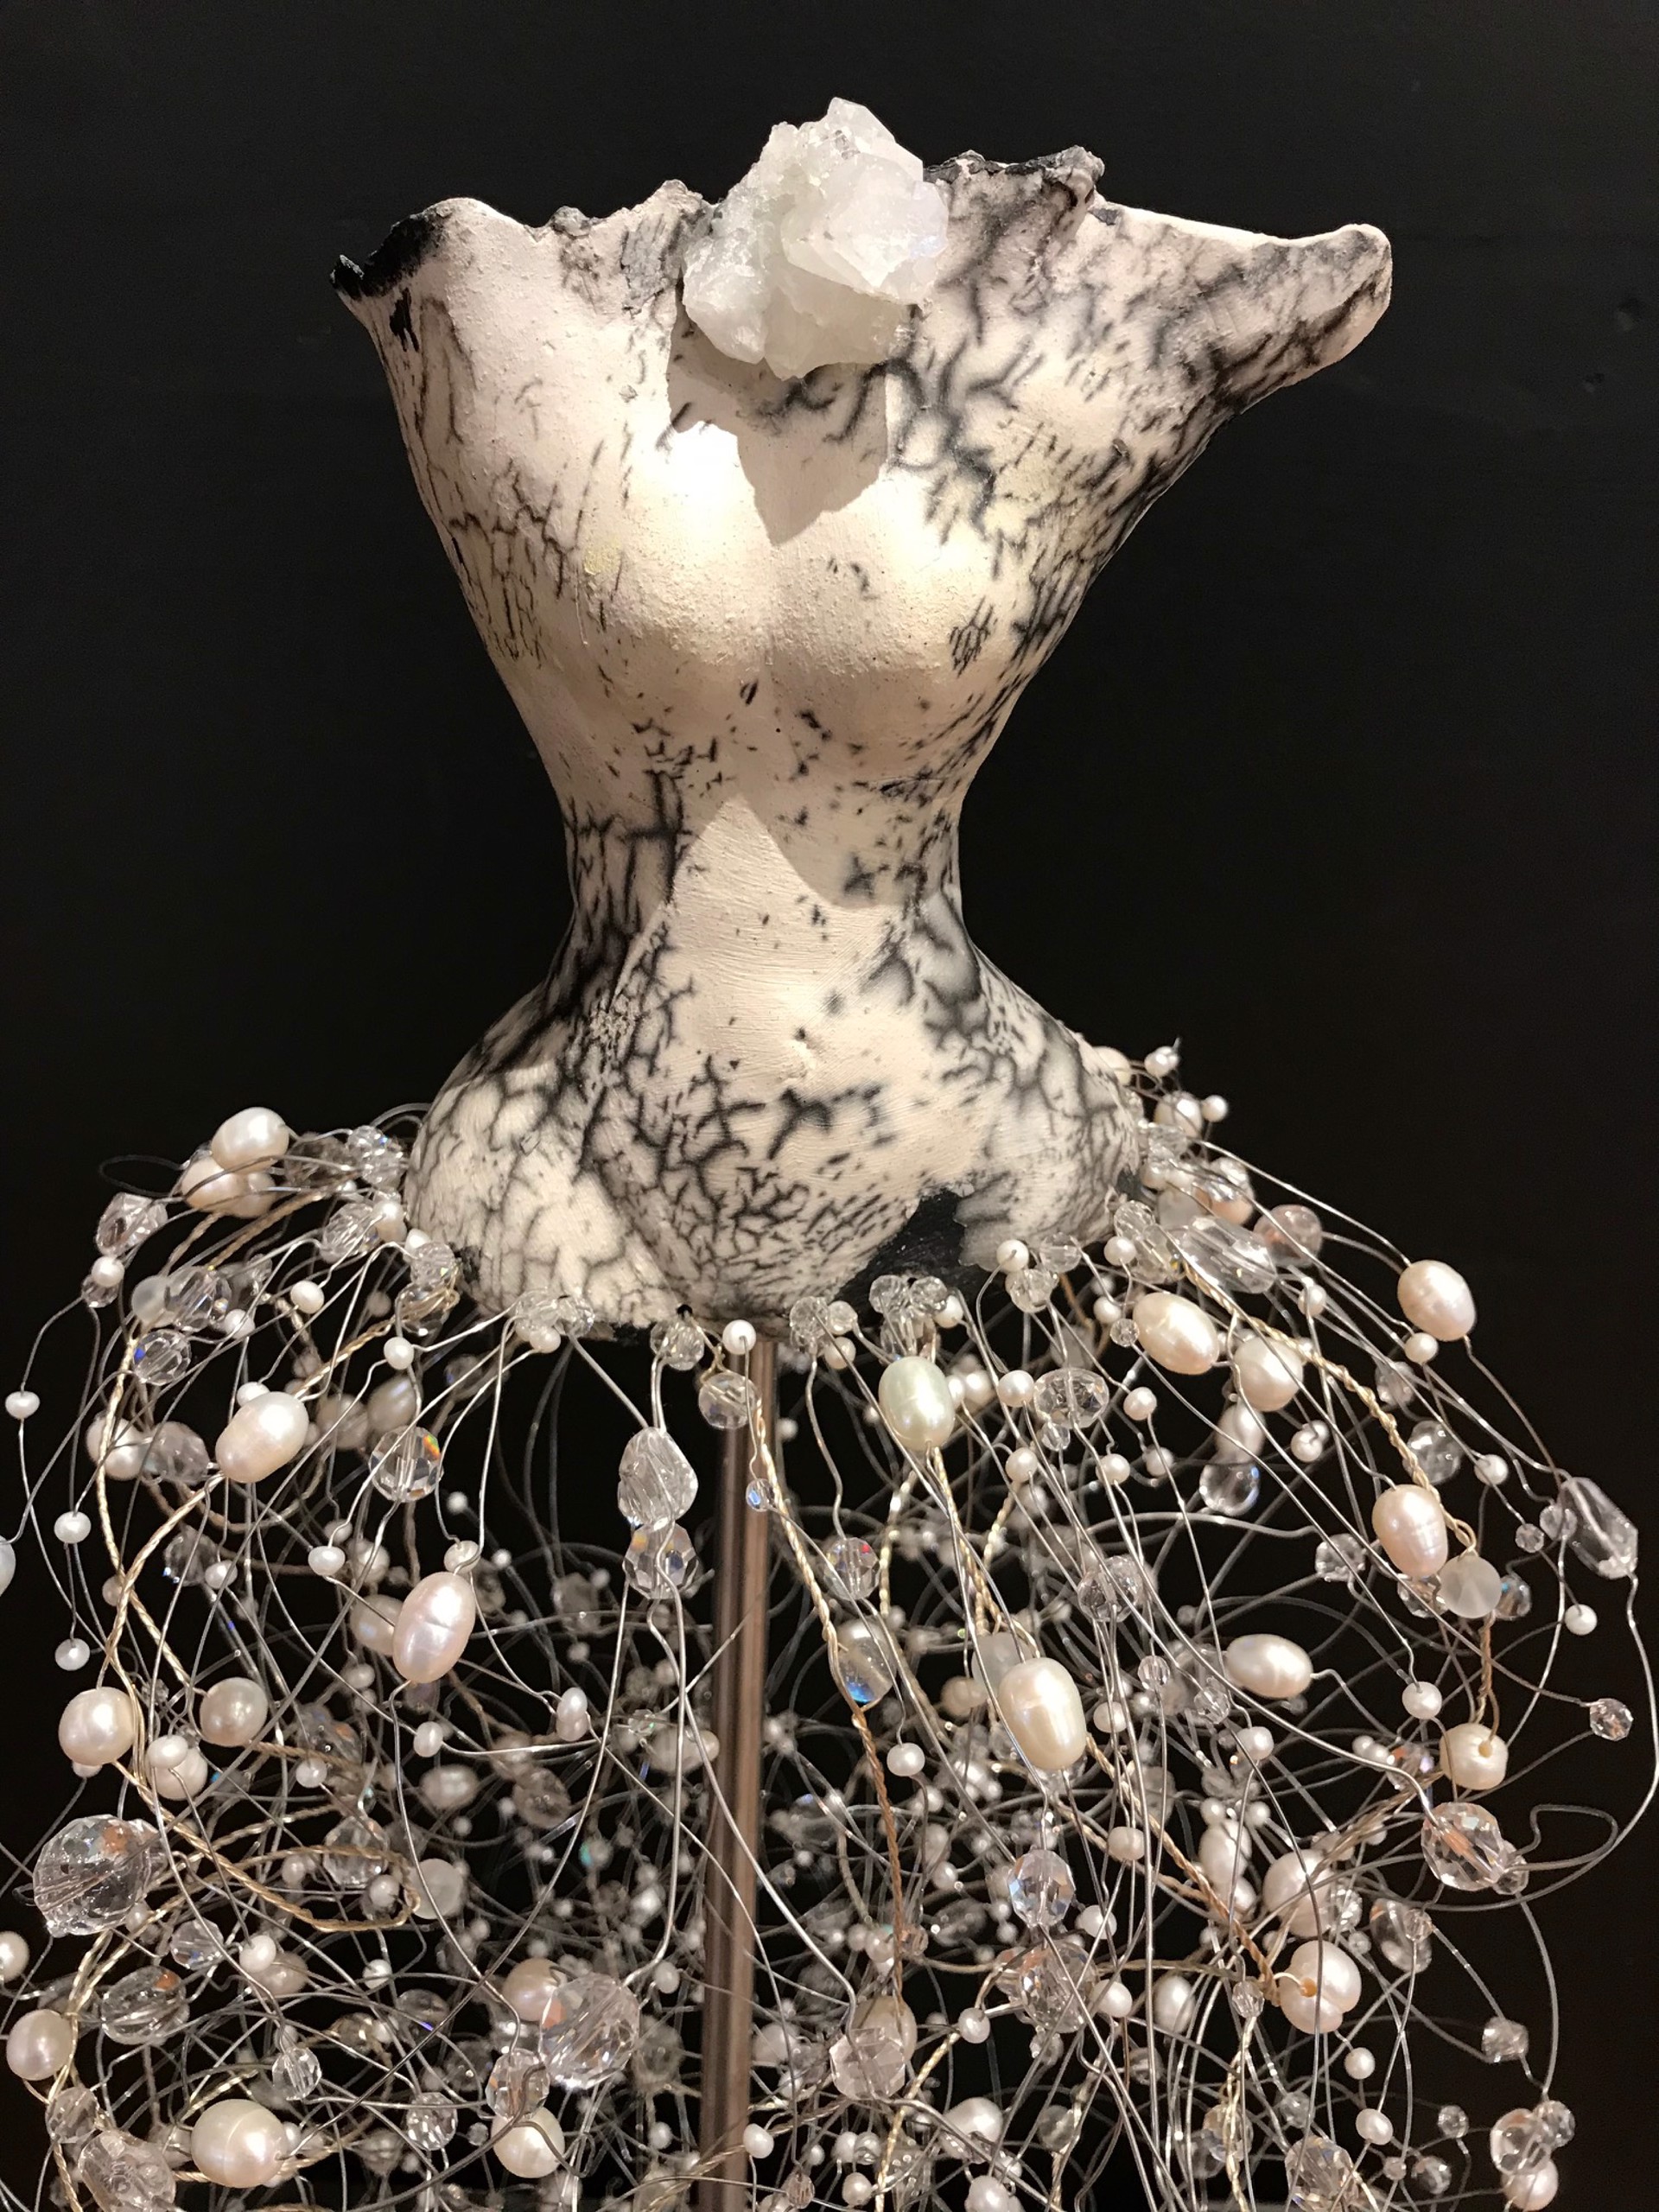 Naked Raku Pearly Girl with Pearls and Quartz by Estella Fransbergen